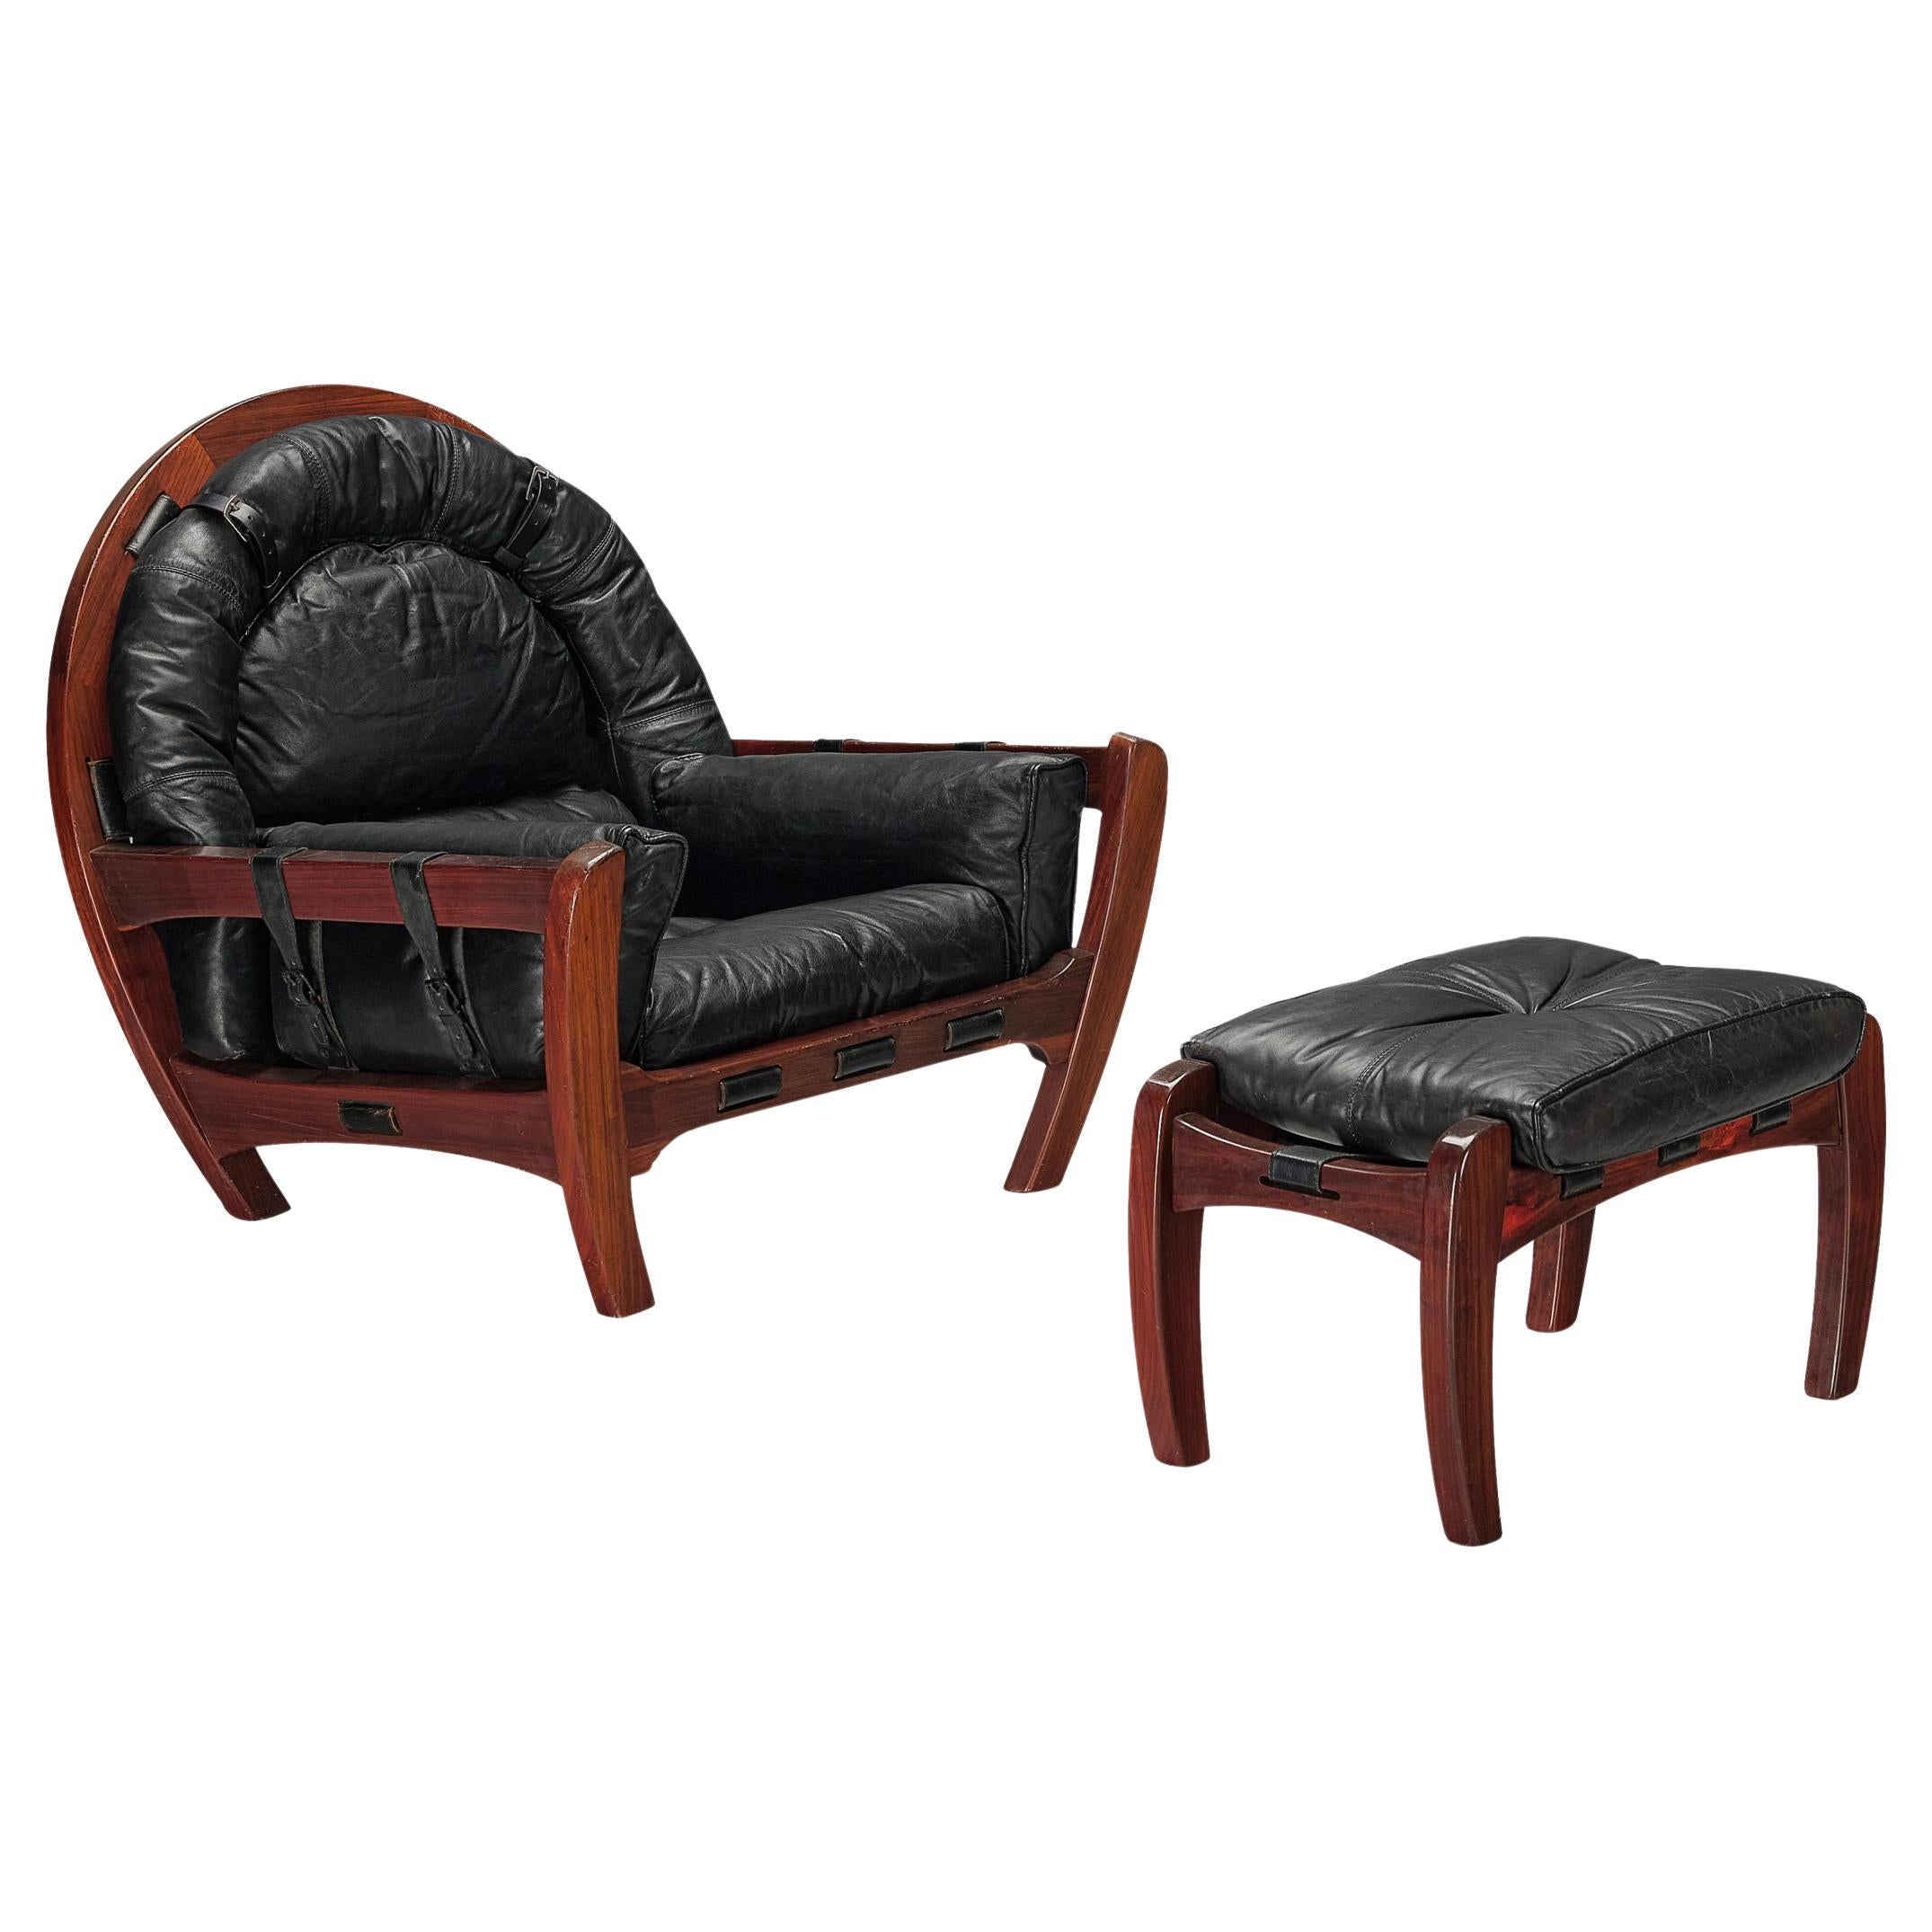 Luciano Frigerio 'Rancero' Lounge Chair with Ottoman in Black Leather  For Sale